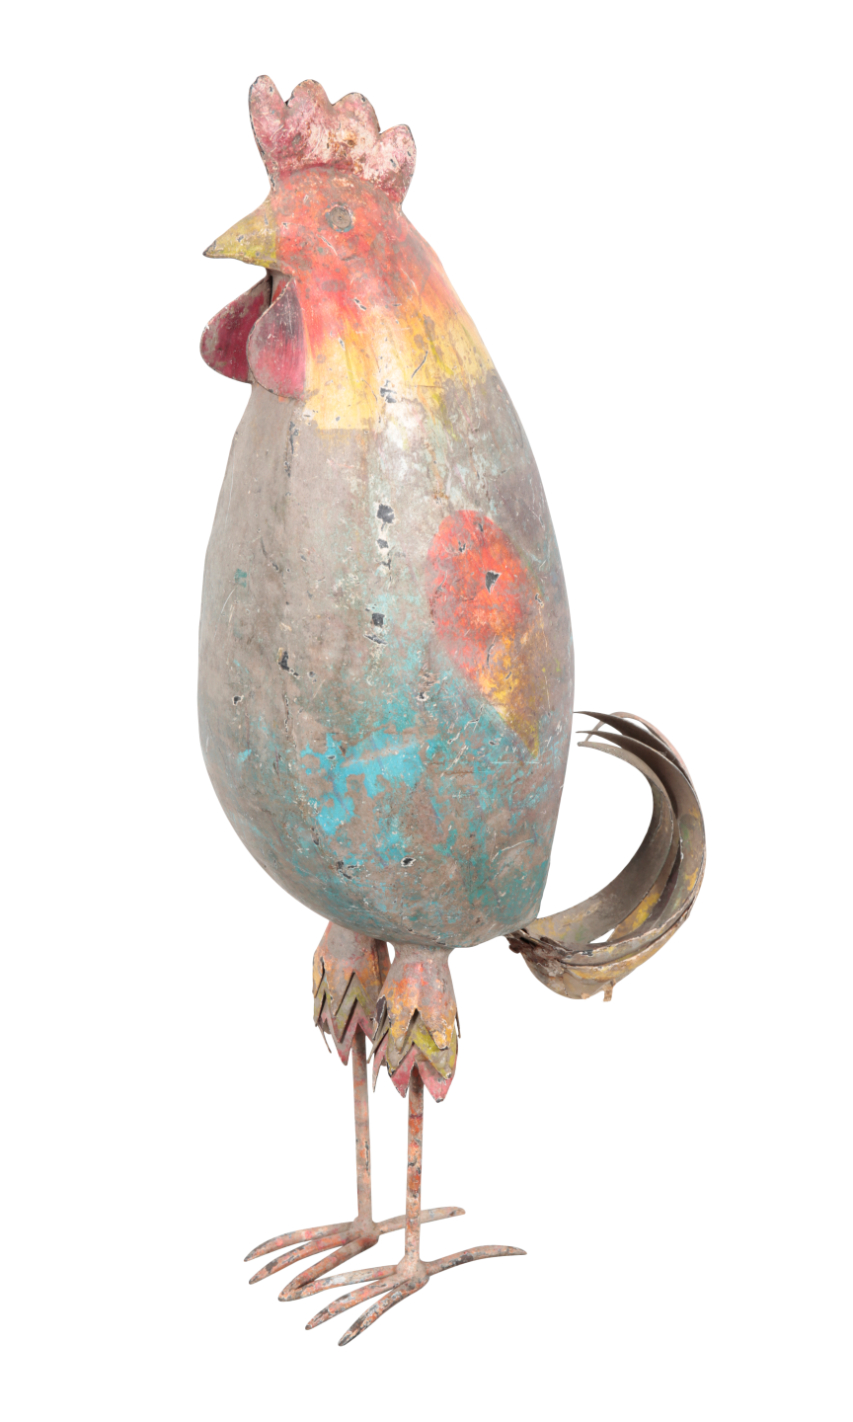 A PAINTED METAL COCKEREL cast with